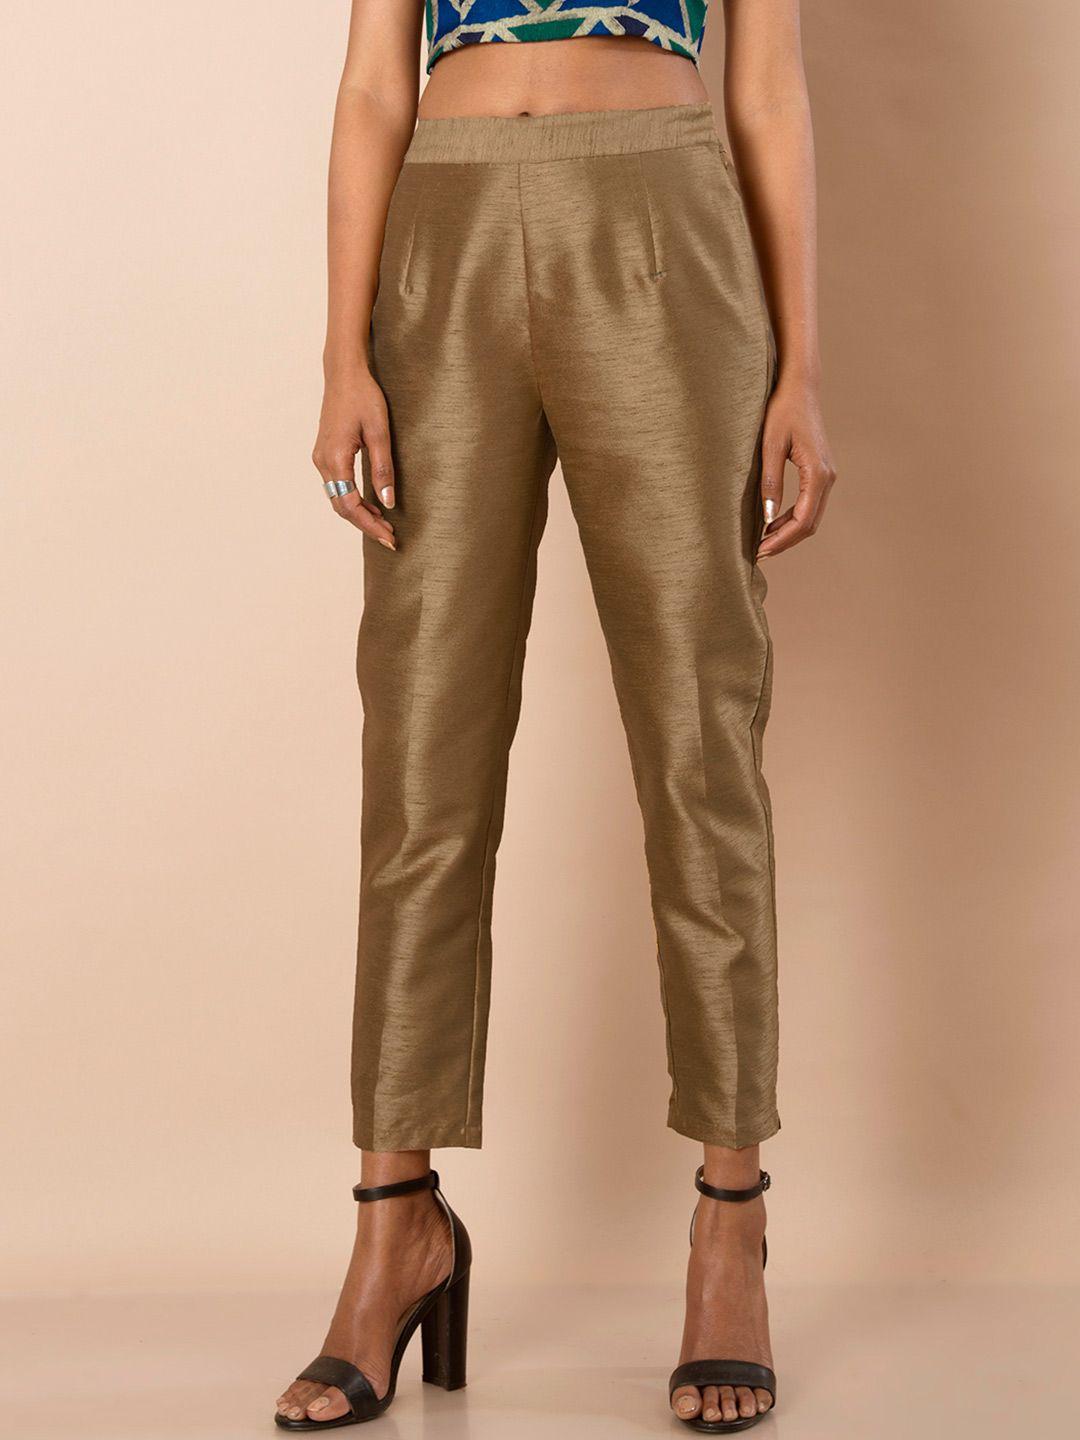 indya-gold-toned-silk-cigarette-trousers